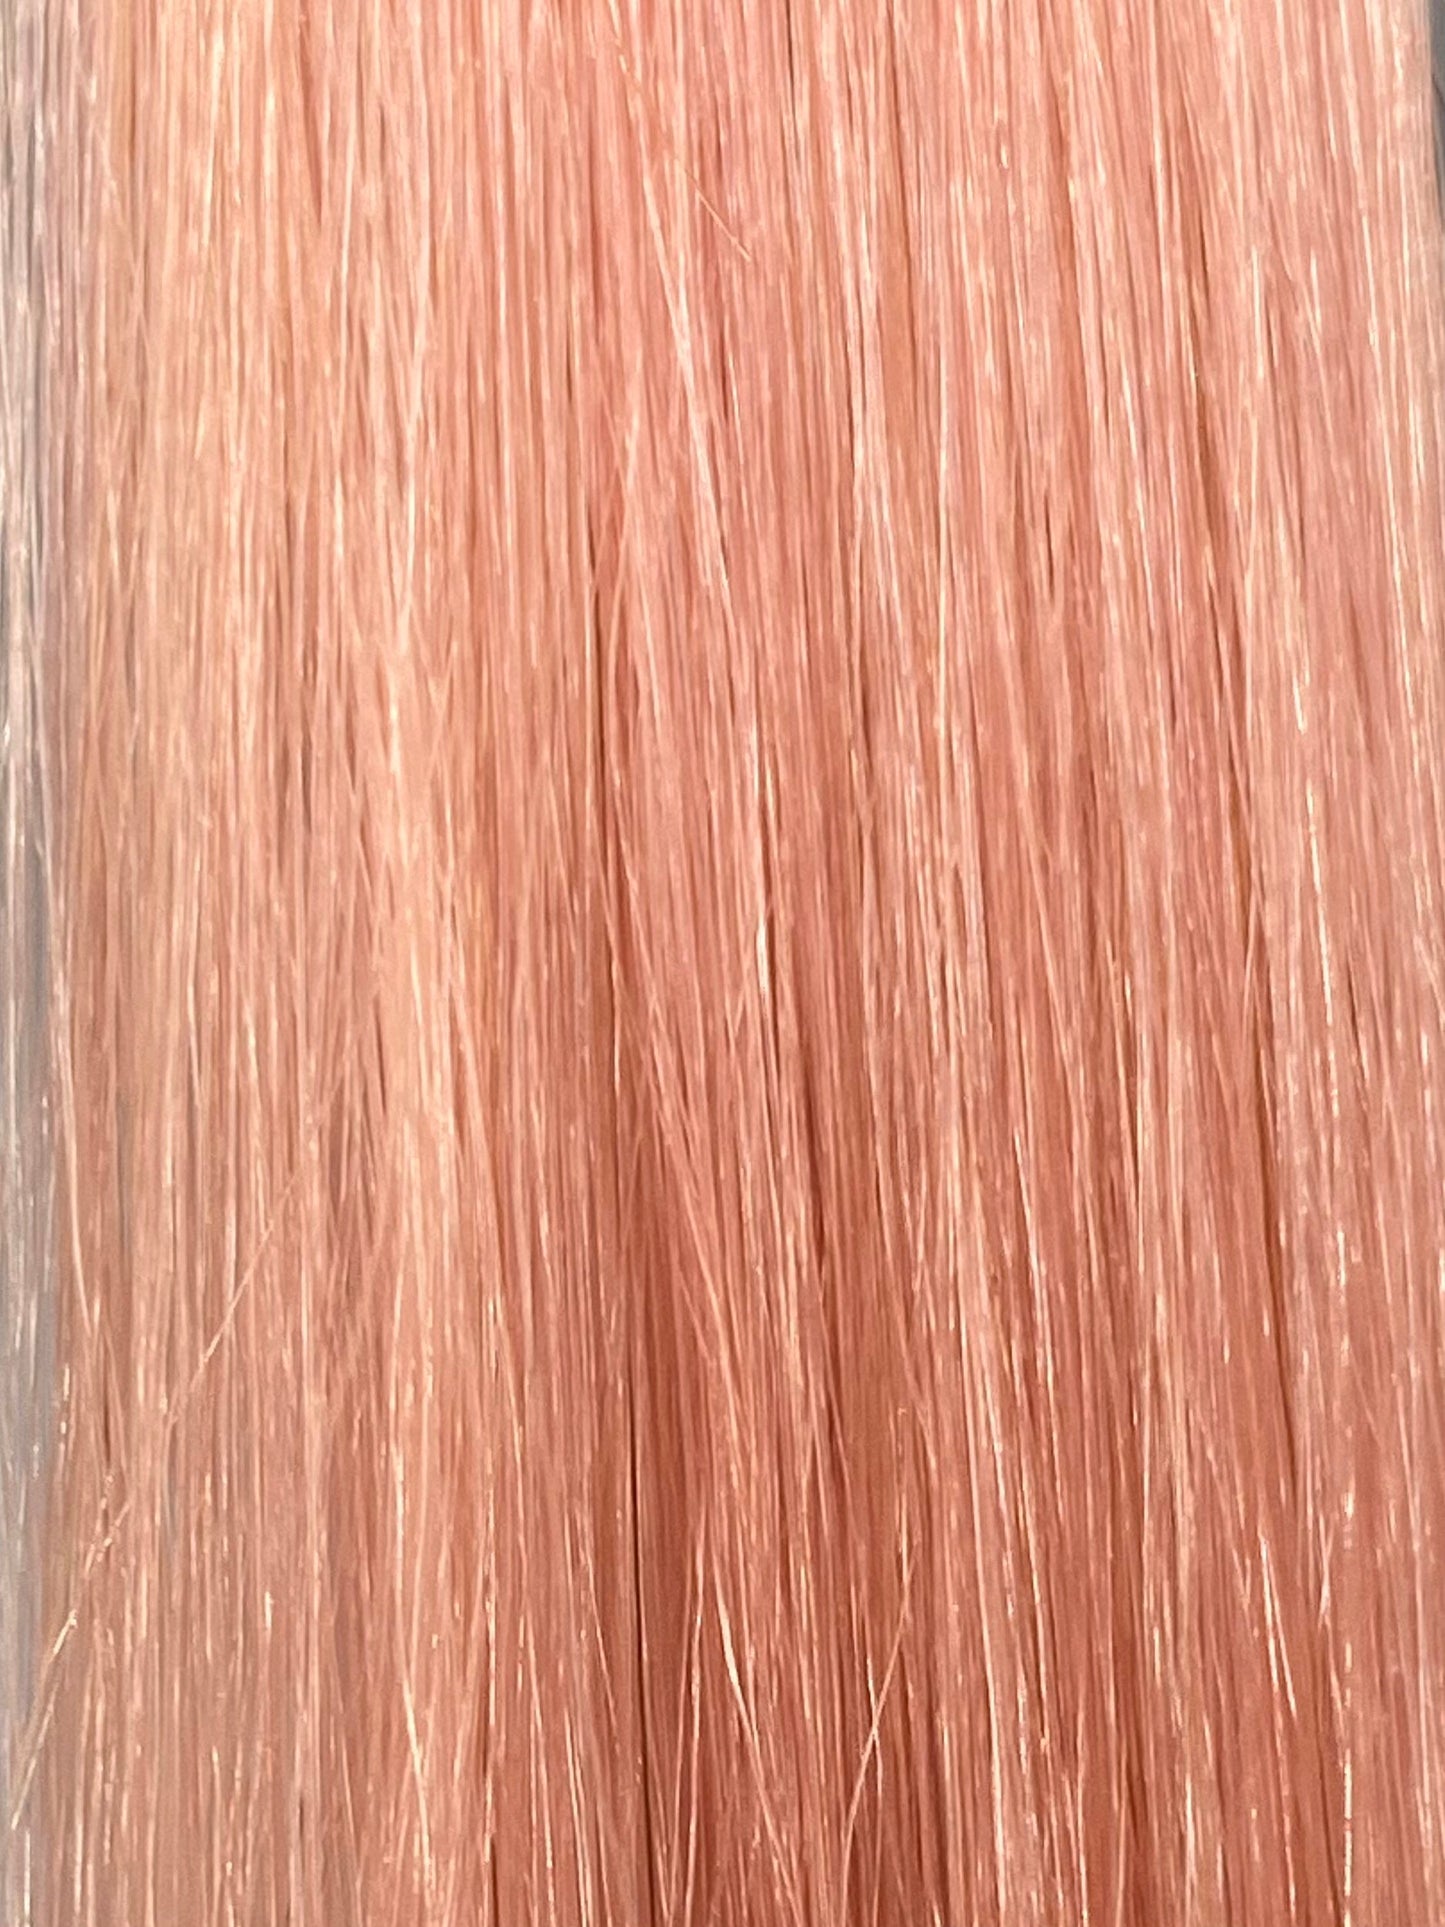 Fusion hair extensions #Pink - Fantasy - 50cm/20 inches - Pink Fusion Euro So Cap 